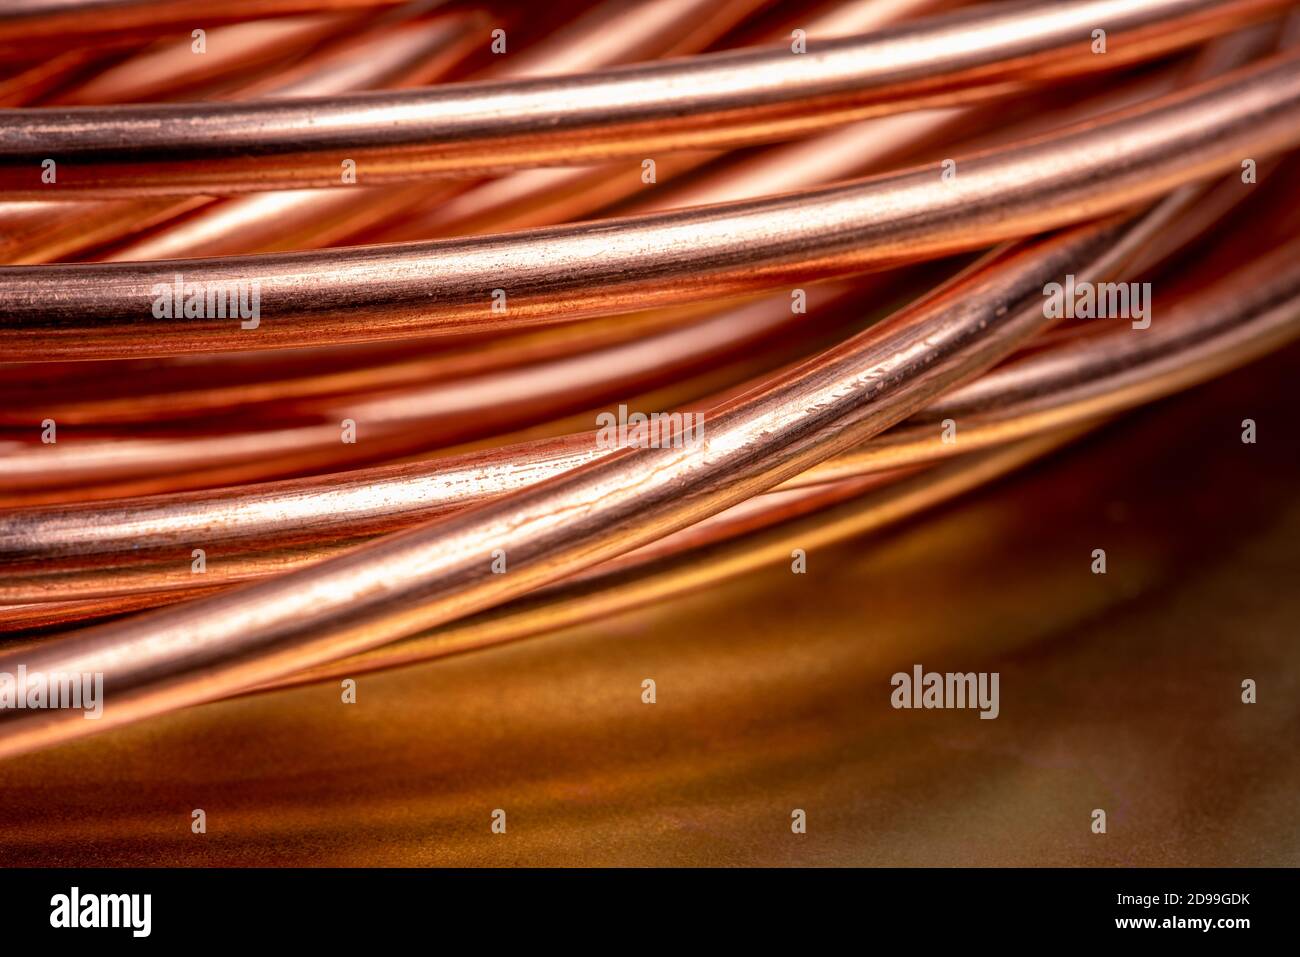 Electrical power cable close up. IEC standard color code. Cross-section  with cable jacket, wire insulations in brown, blue and yellow-green color  with flexible stranded copper wires. Macro photo. Stock Photo